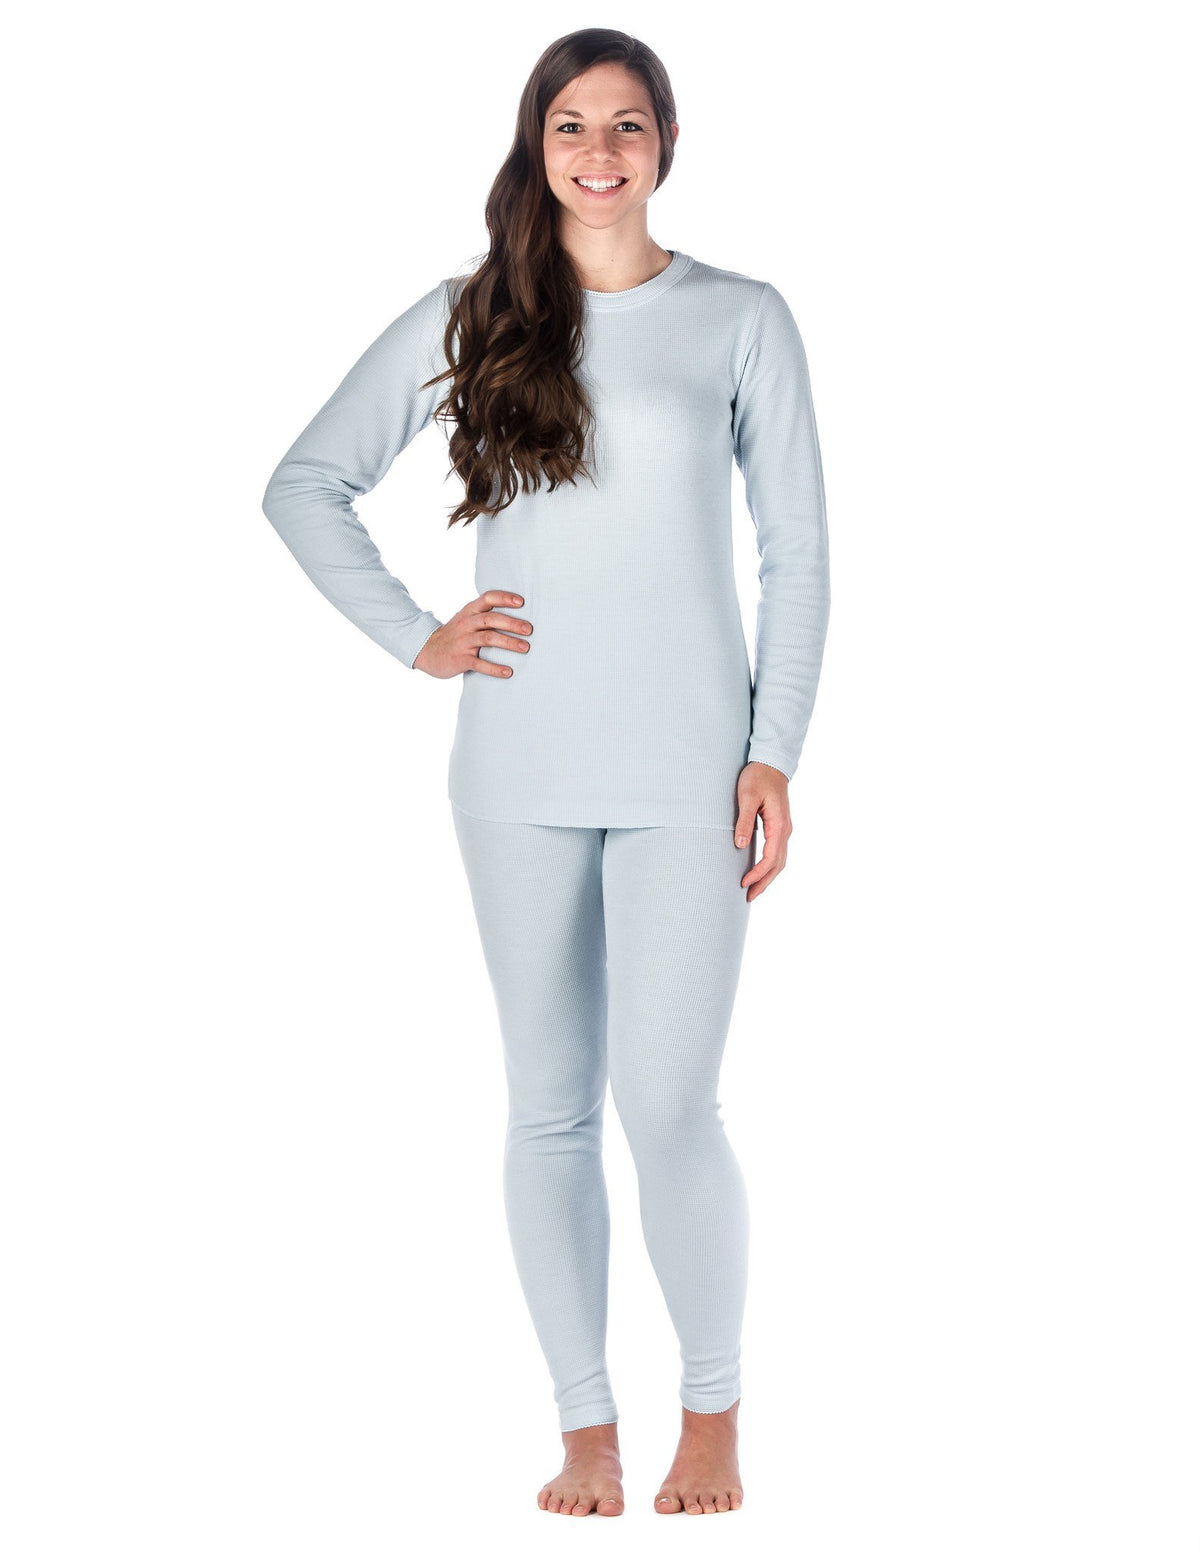 Women's Extreme Cold Waffle Knit Thermal Top and Bottom Set - Light Blue